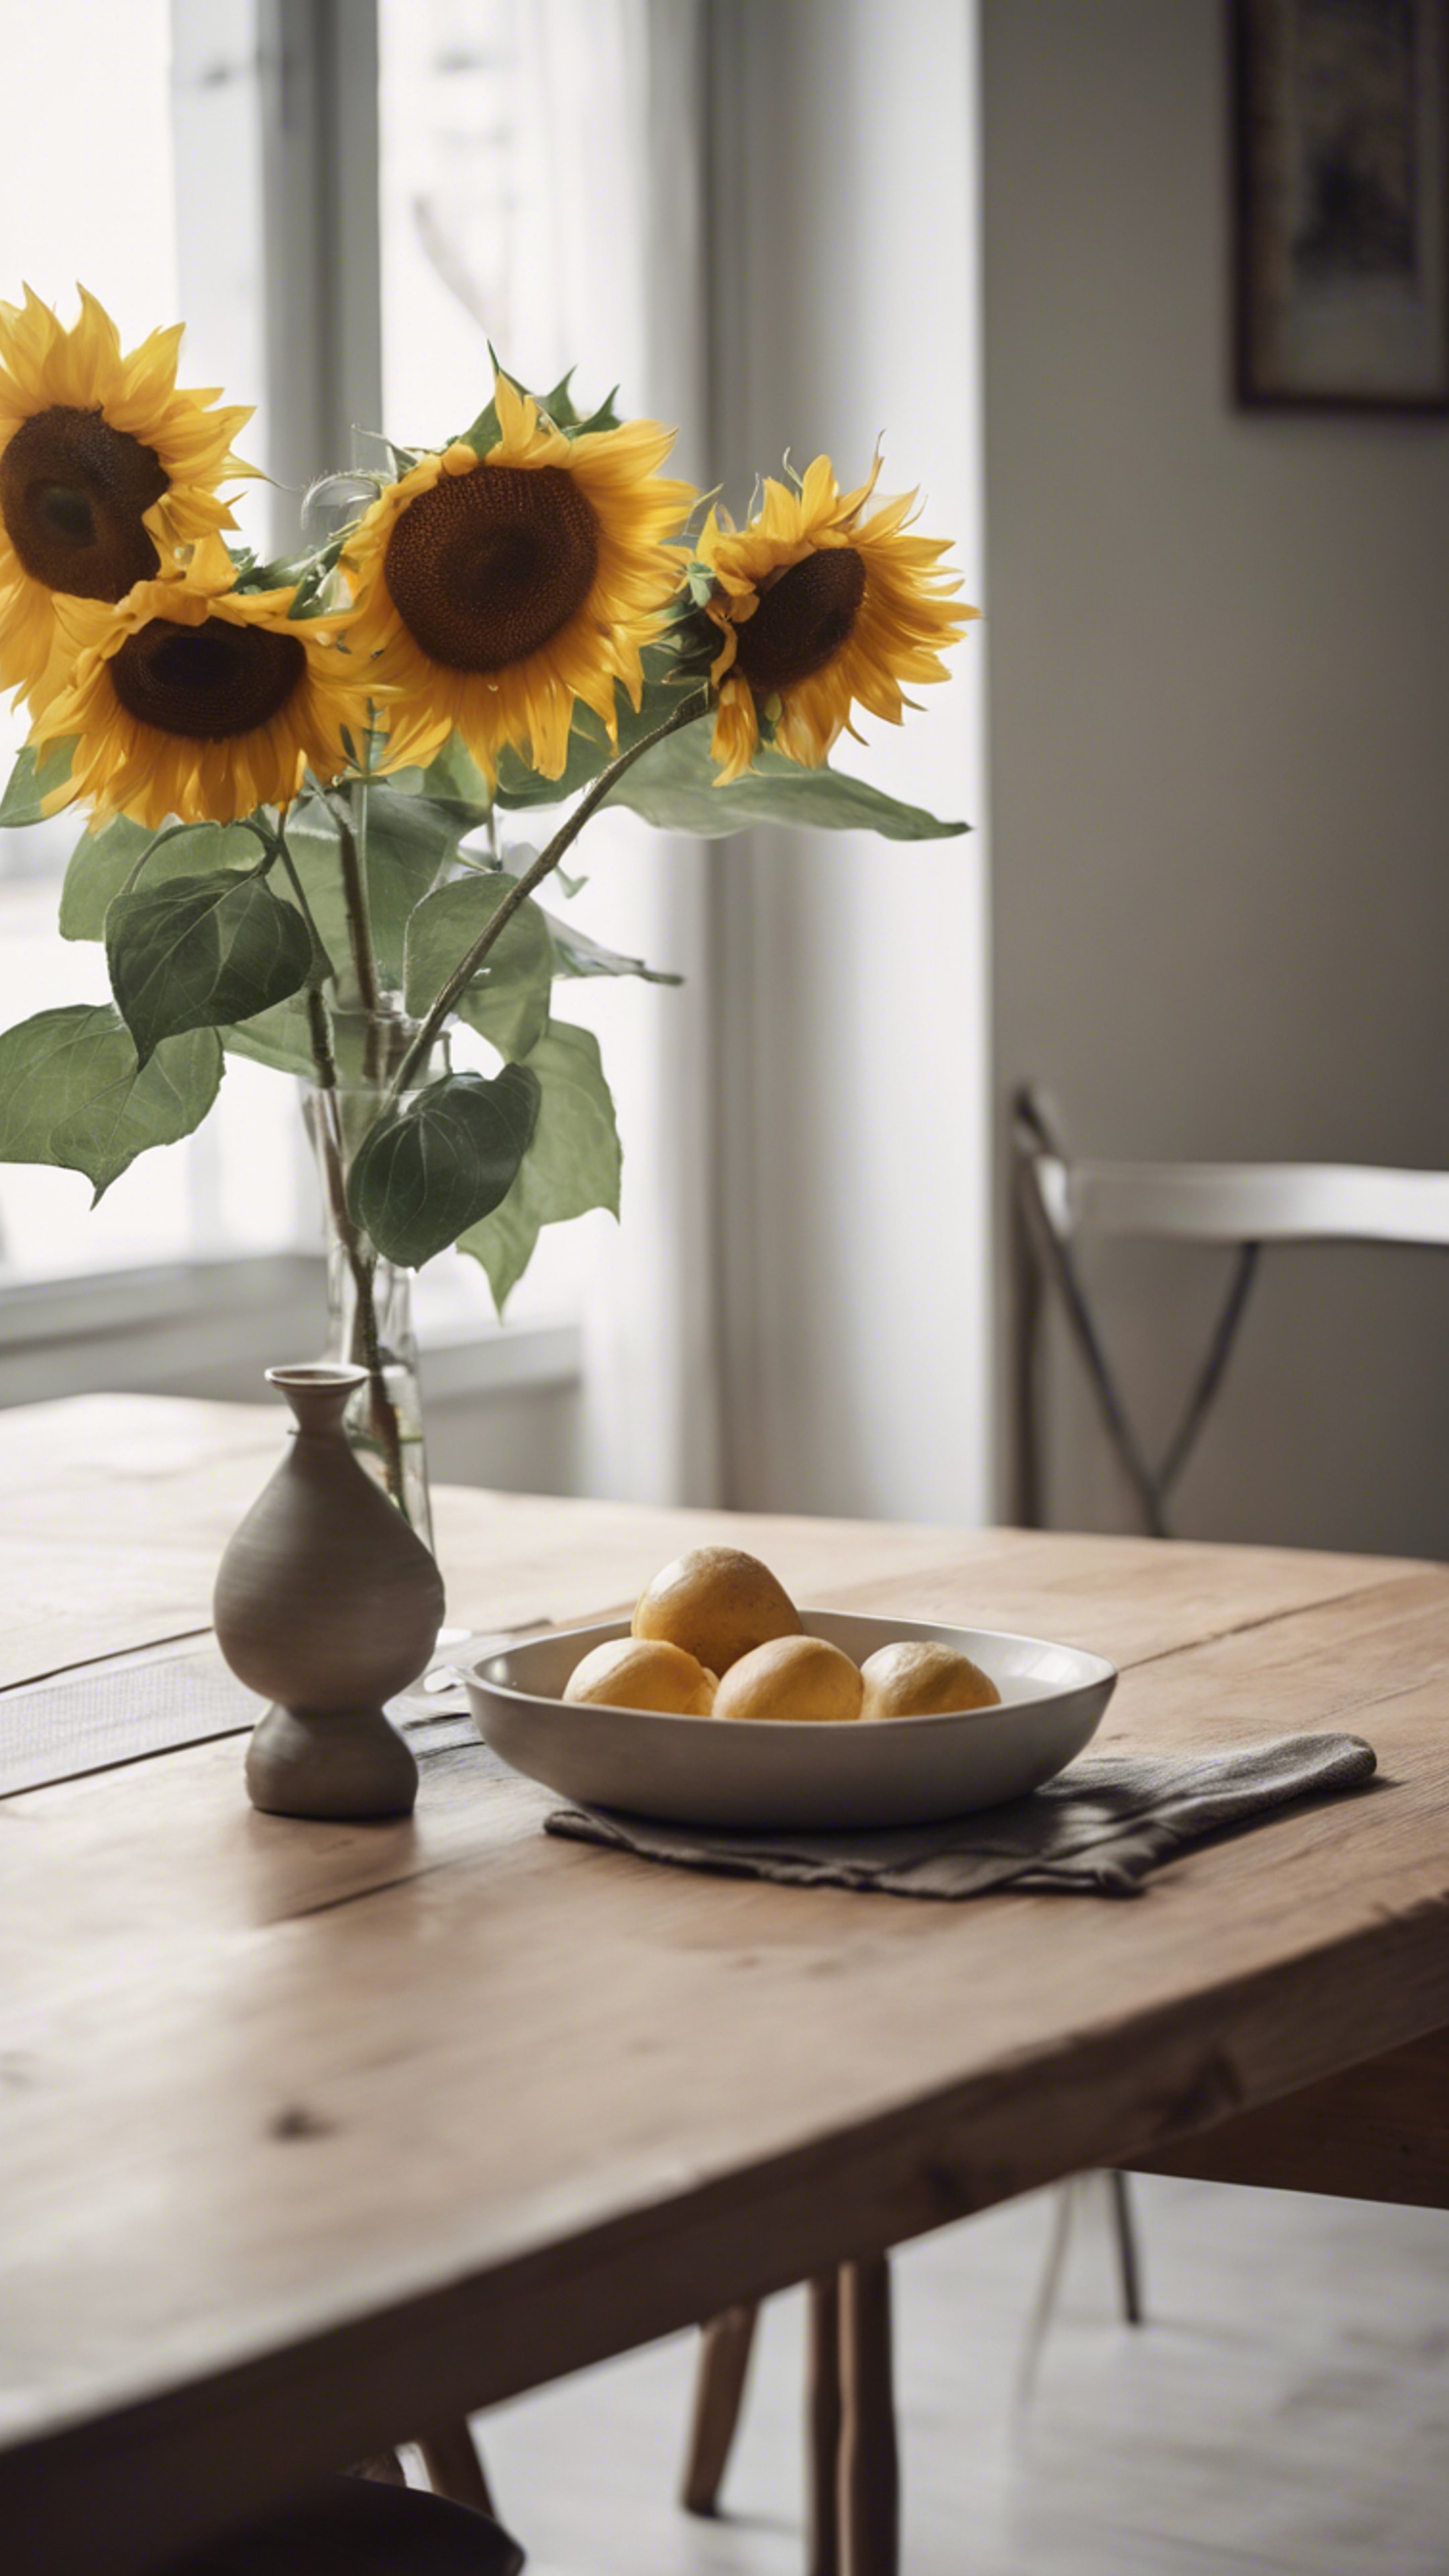 A minimalist dining area with a wooden table, set with simple china and a vase of sunflowers. Kertas dinding[7db5290c1b5a4d25ba08]